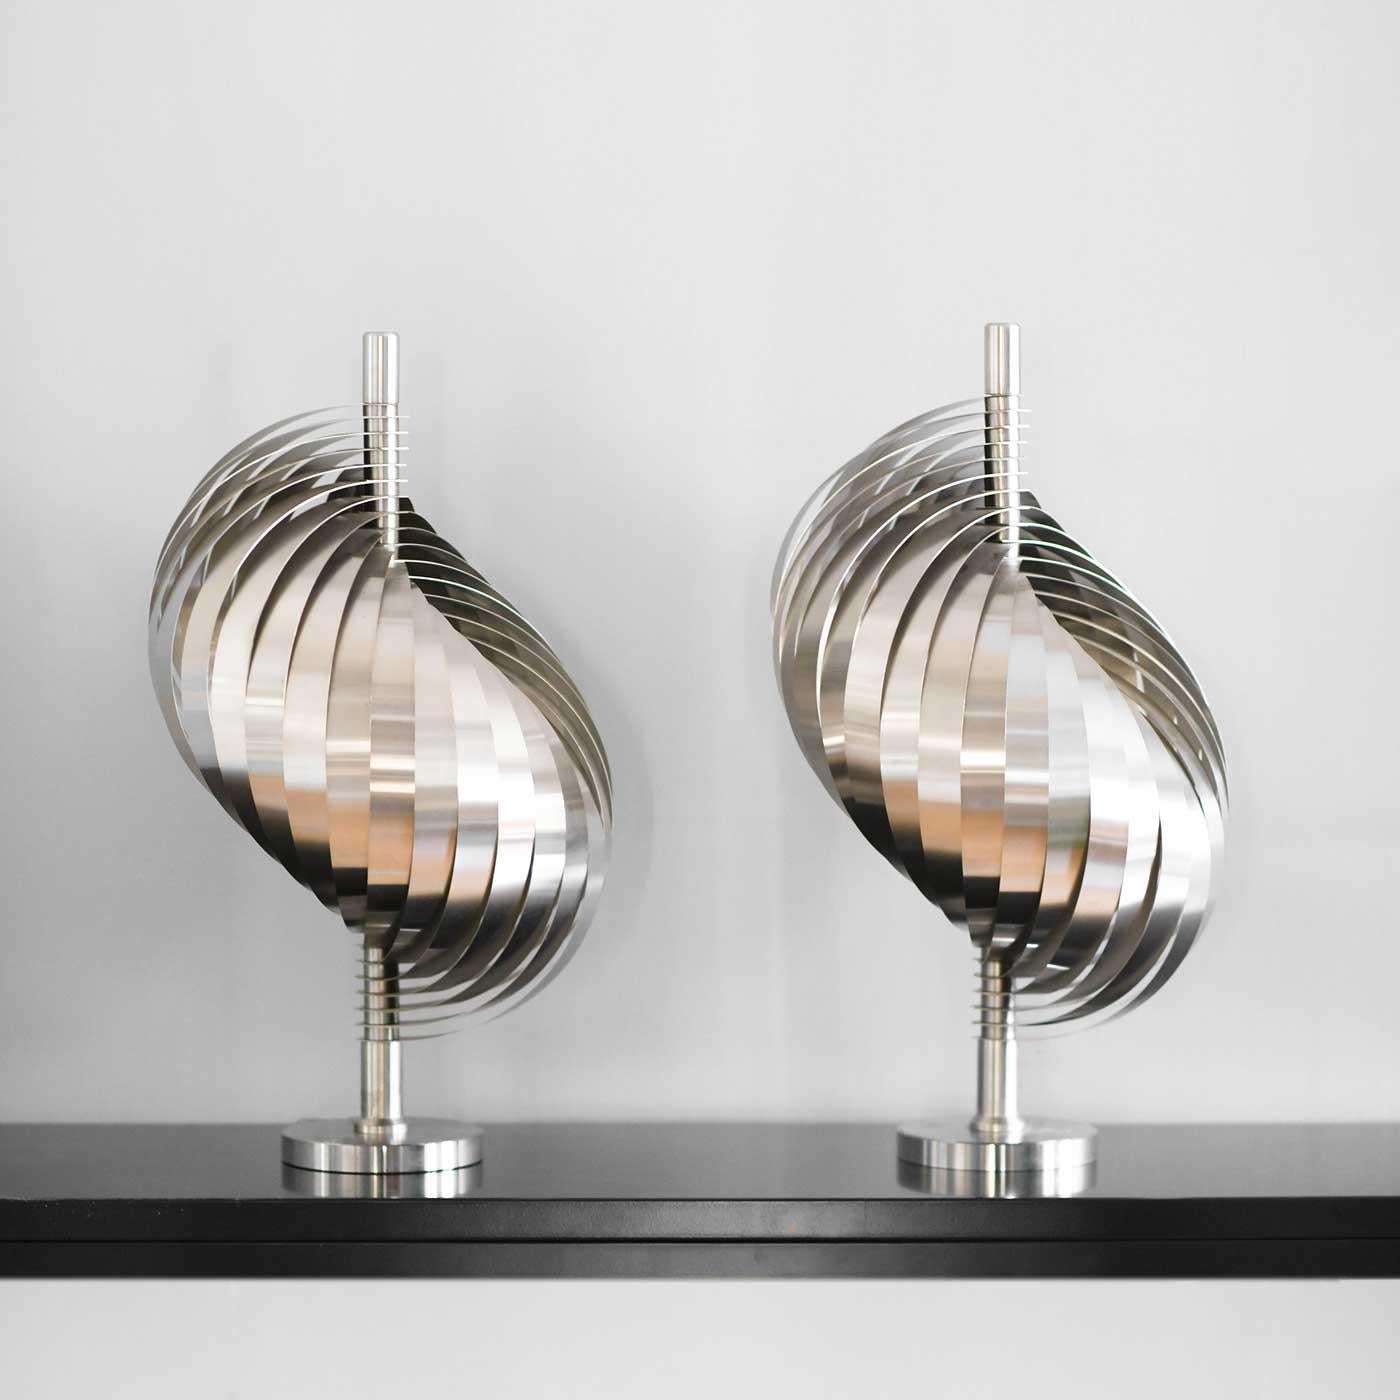 Late 20th Century Pair of Table Lamps by Henri Mathieu with Structure in Steel and Aluminum, 1970 For Sale